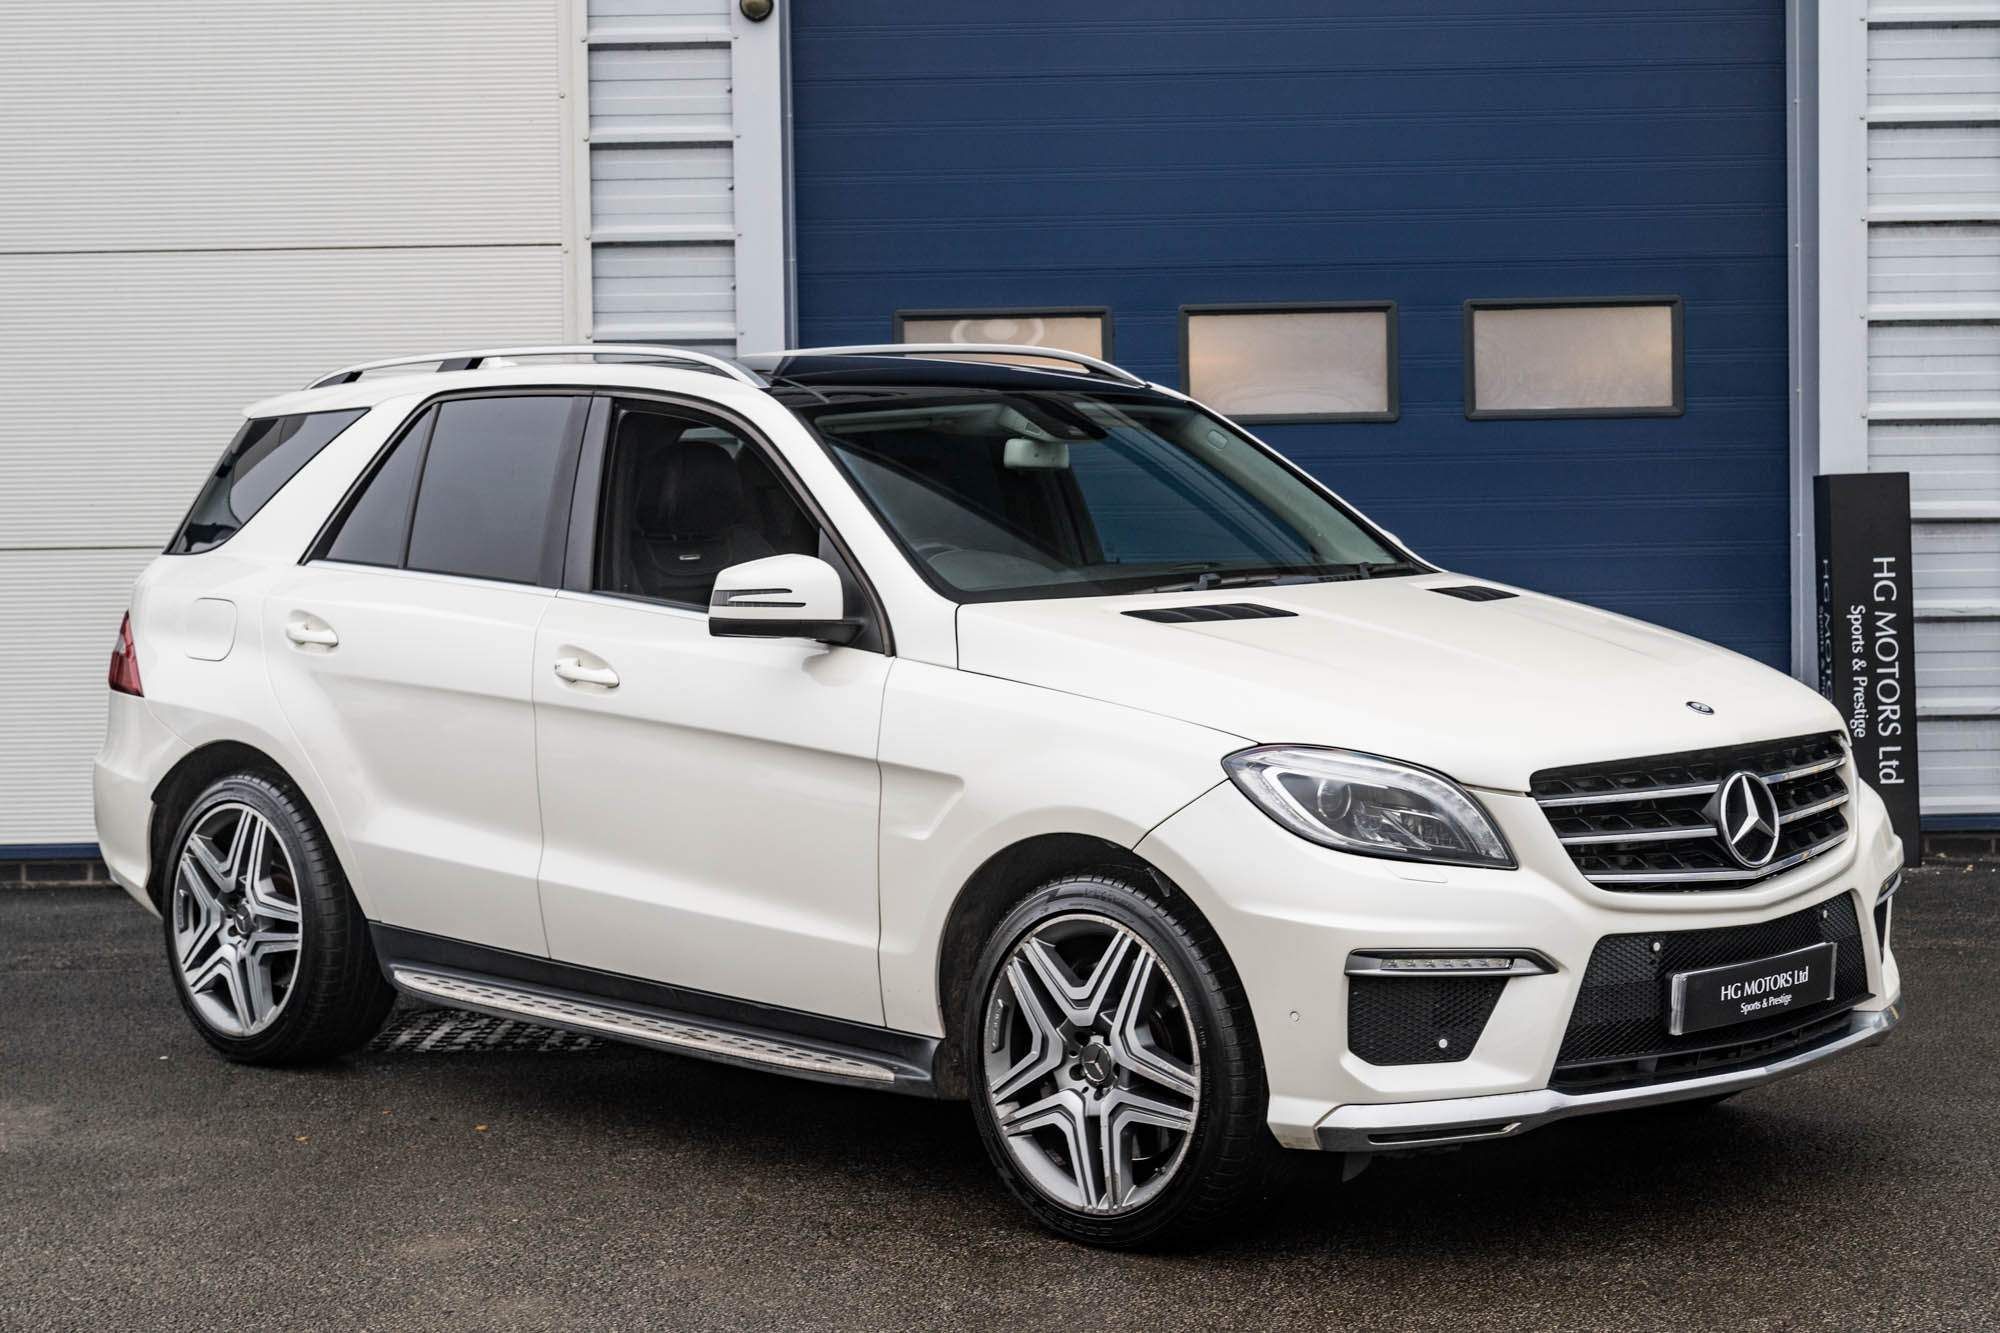 Mercedes-BenzM Class5.5 ML63 V8 AMG Speedshift Plus 7G-Tronic 4WD 5dr for sale